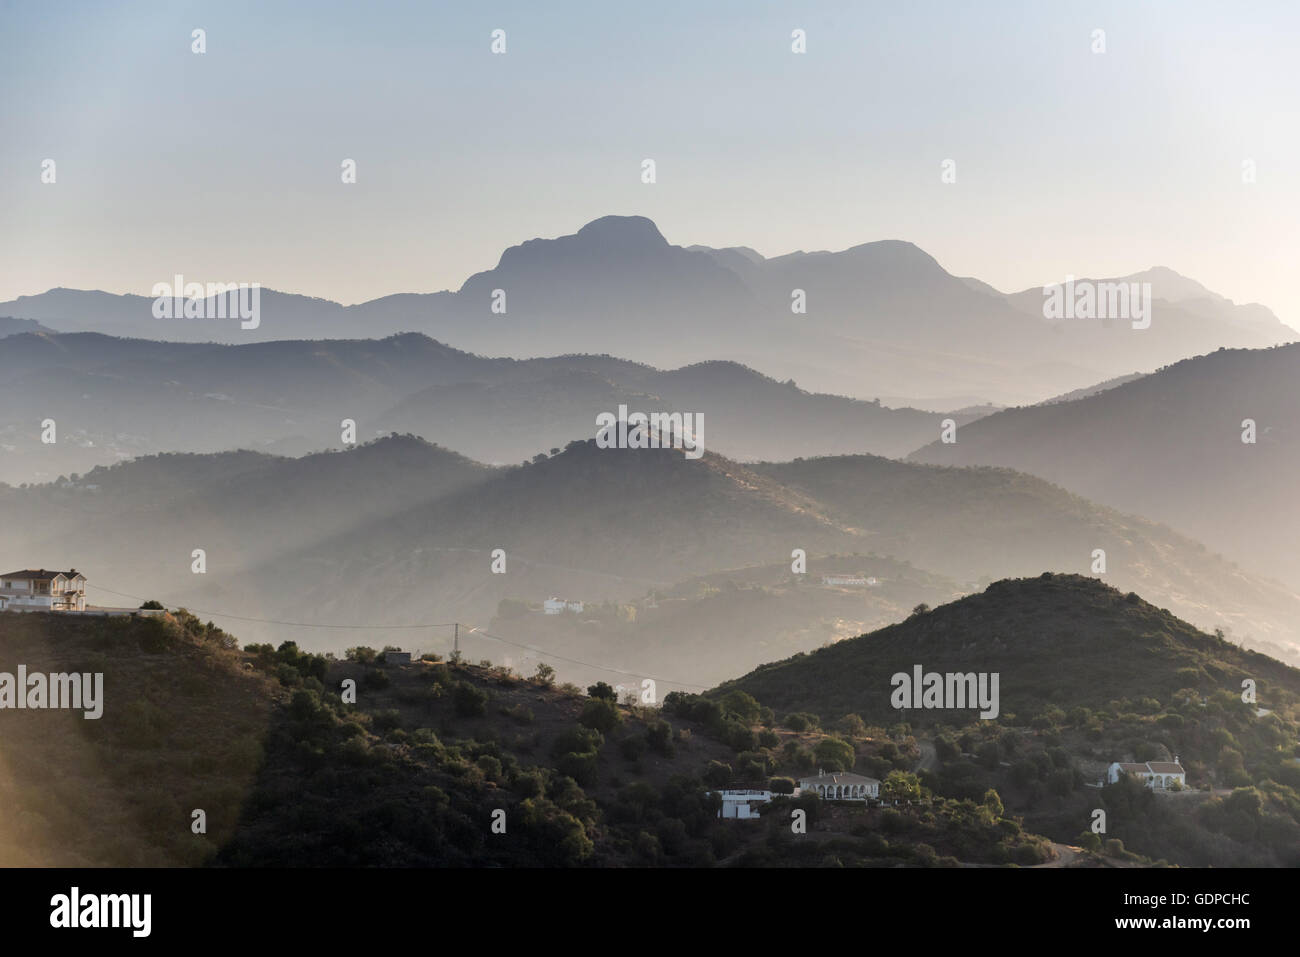 View across the mountains of Malaga province in southern Spain Stock Photo